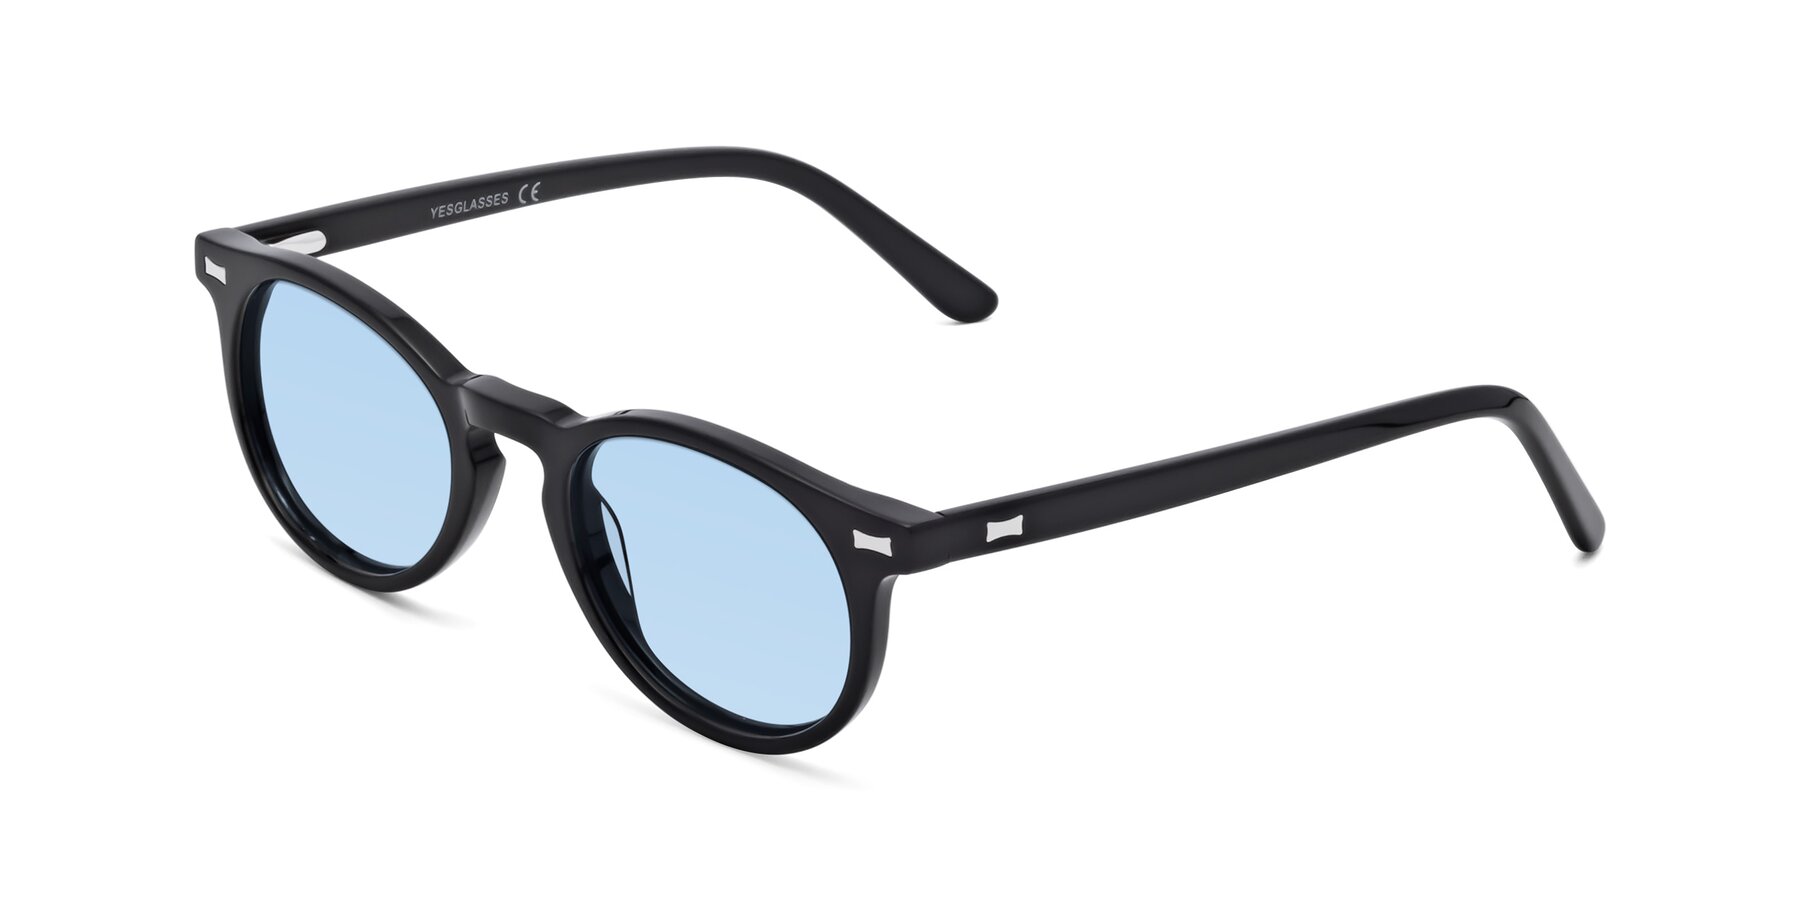 Angle of 17330 in Black with Light Blue Tinted Lenses